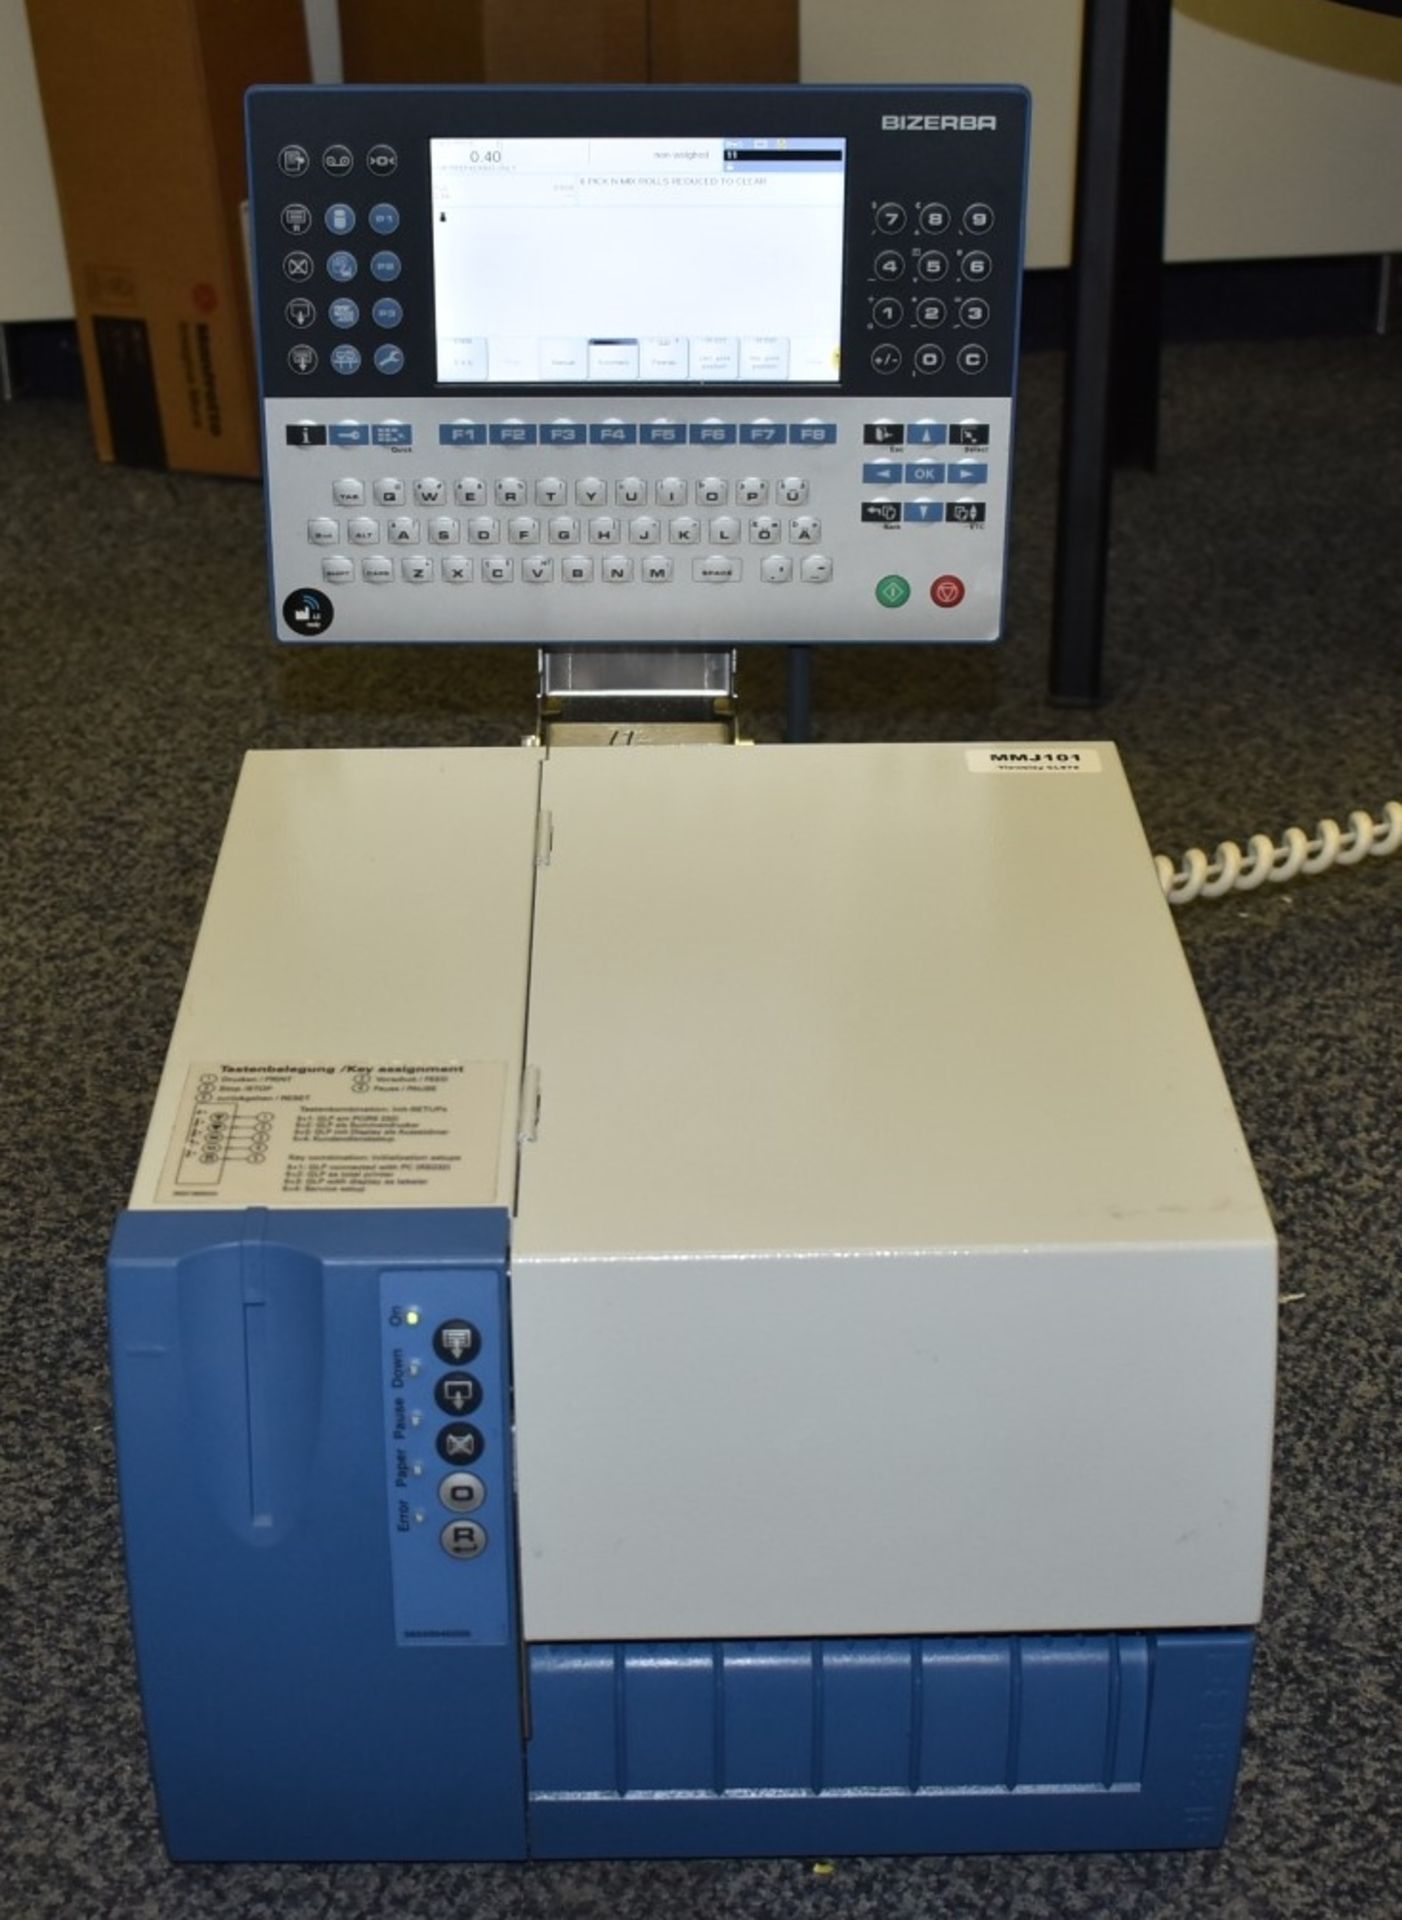 1 x Bizerba Industrial Label Printer GLPmaxx 160 With Colour Screen - Recently Removed From a - Image 11 of 15